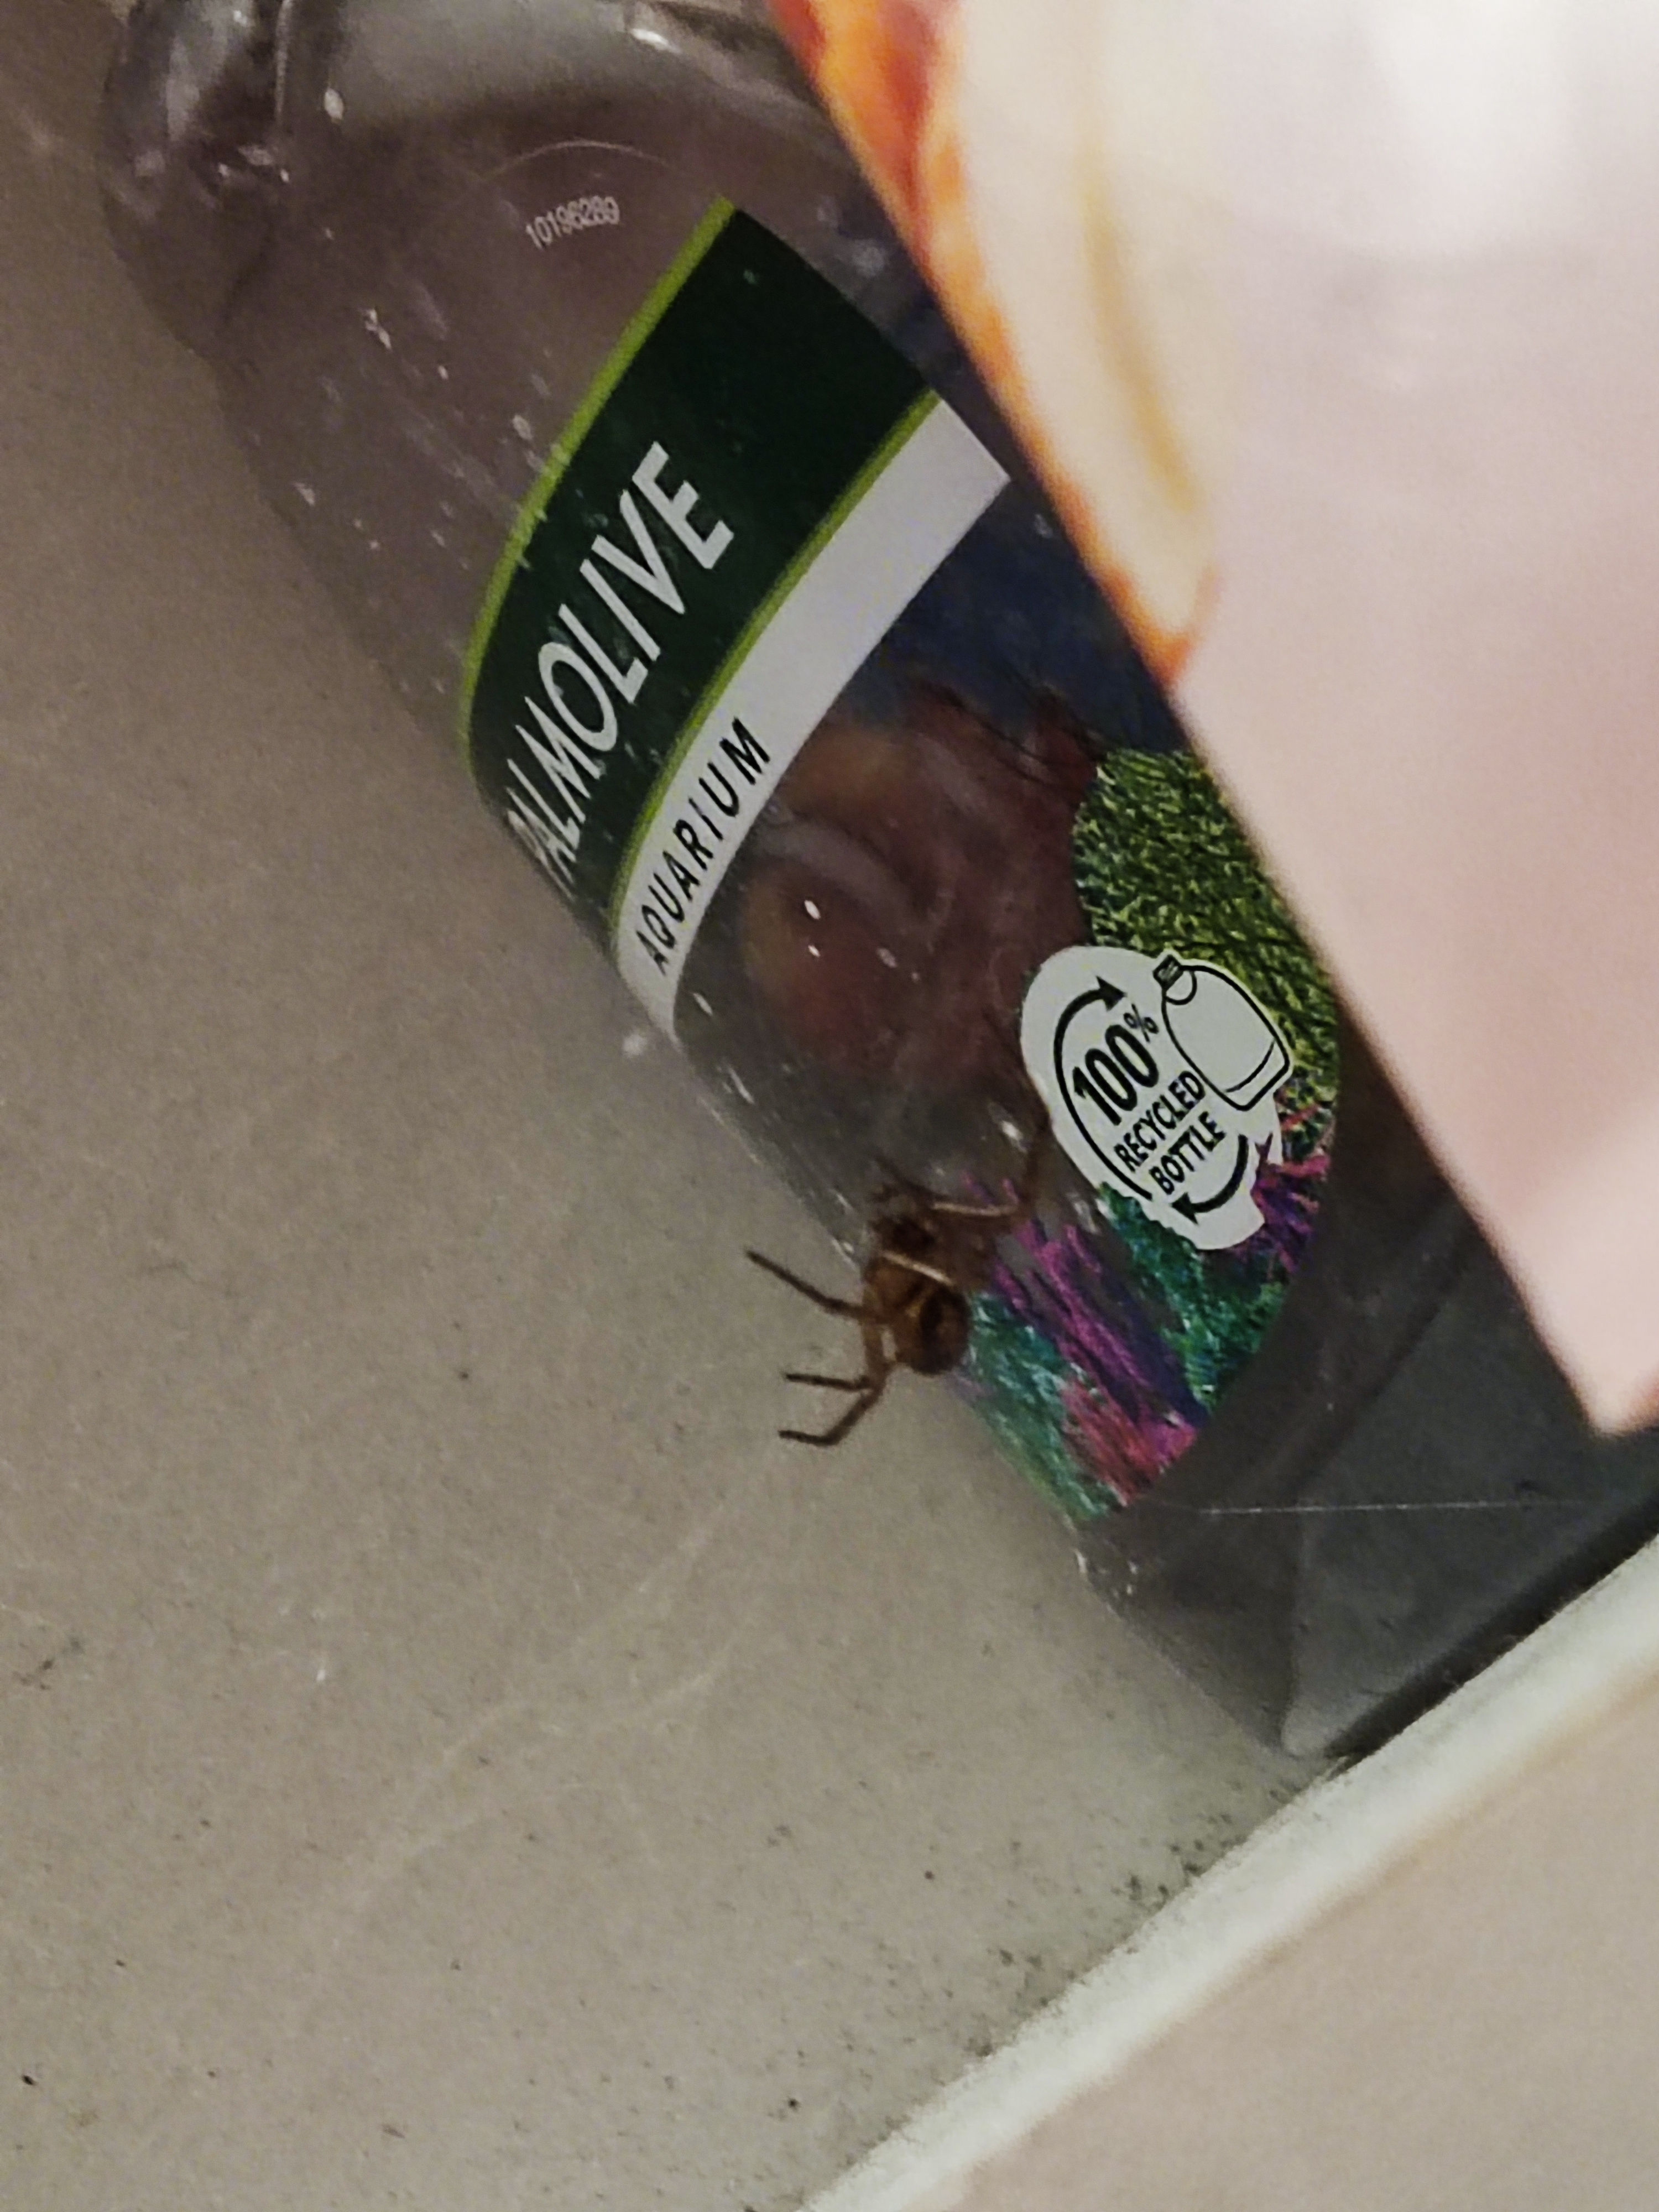 A spider next to a soap bottle in a shelf